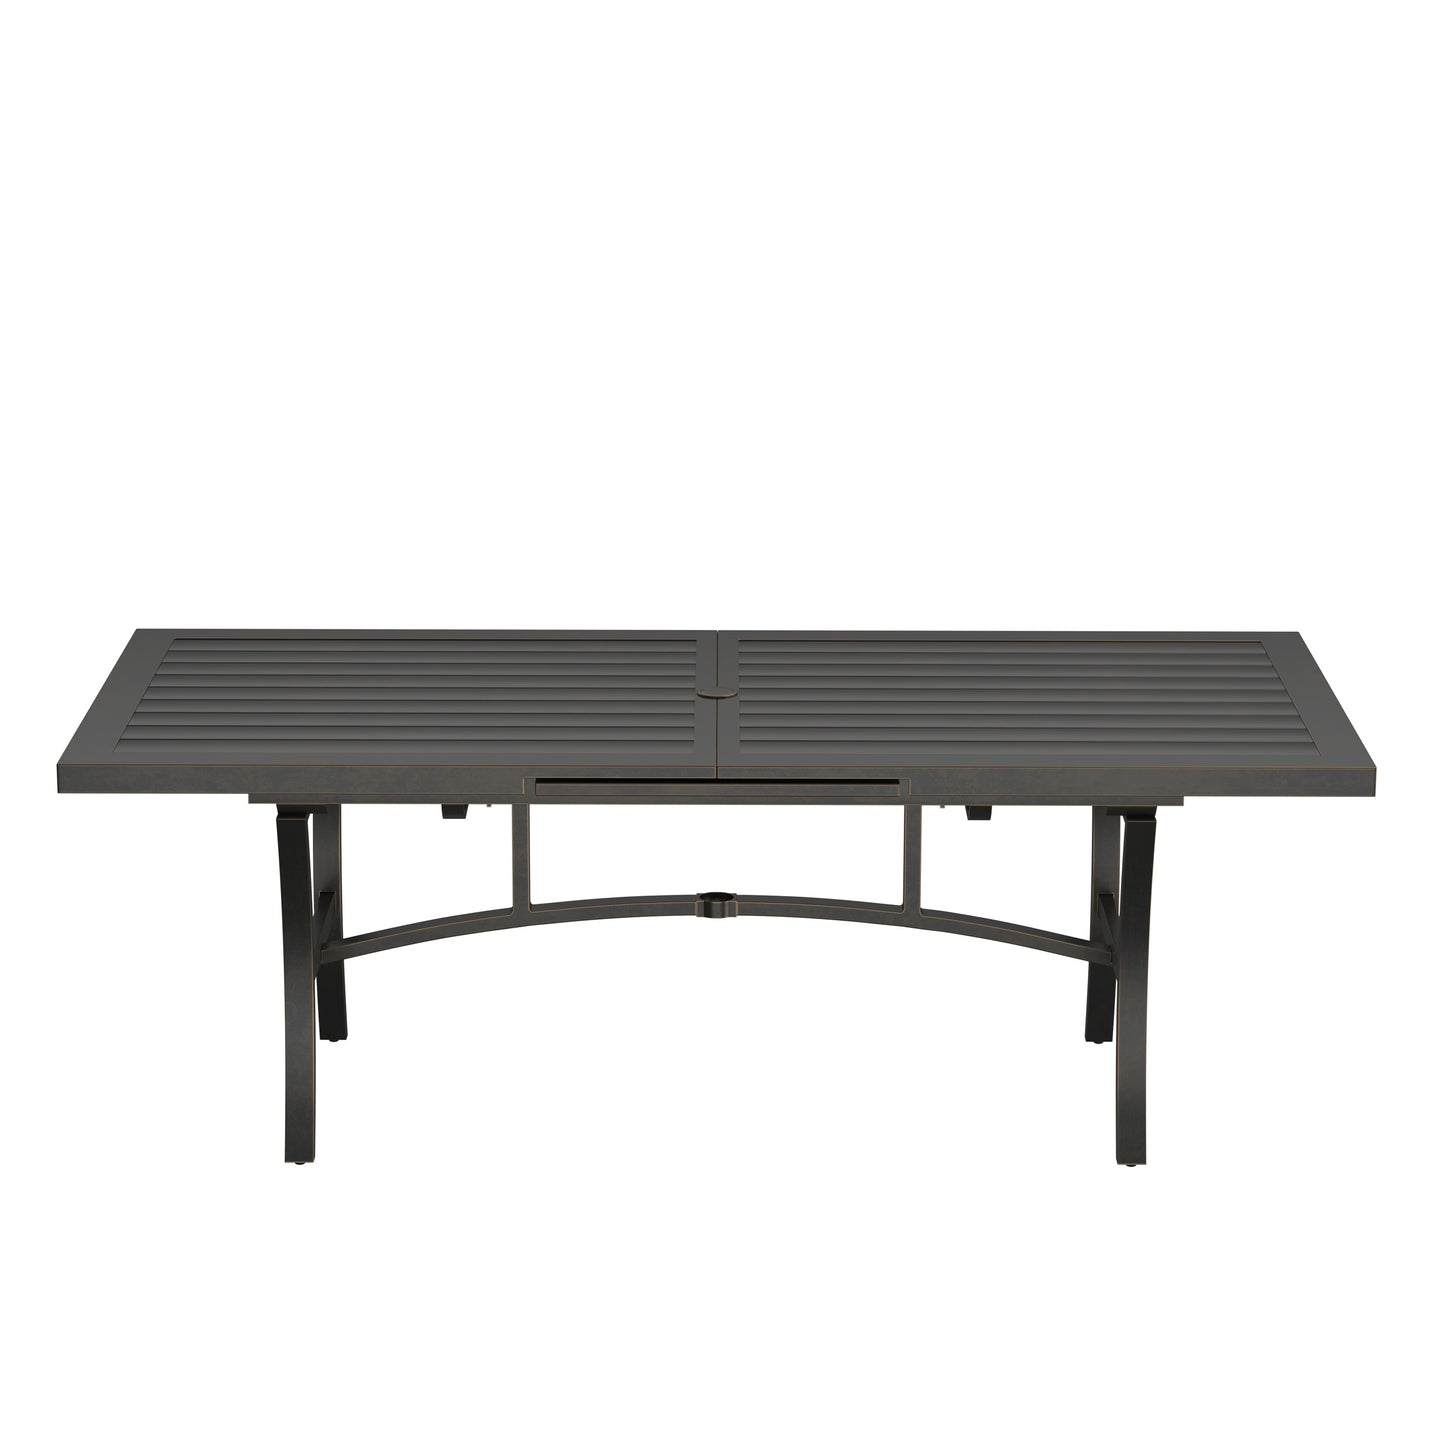 Agio 110 x 40 Slat Top Extension Dining Table Front, image 3